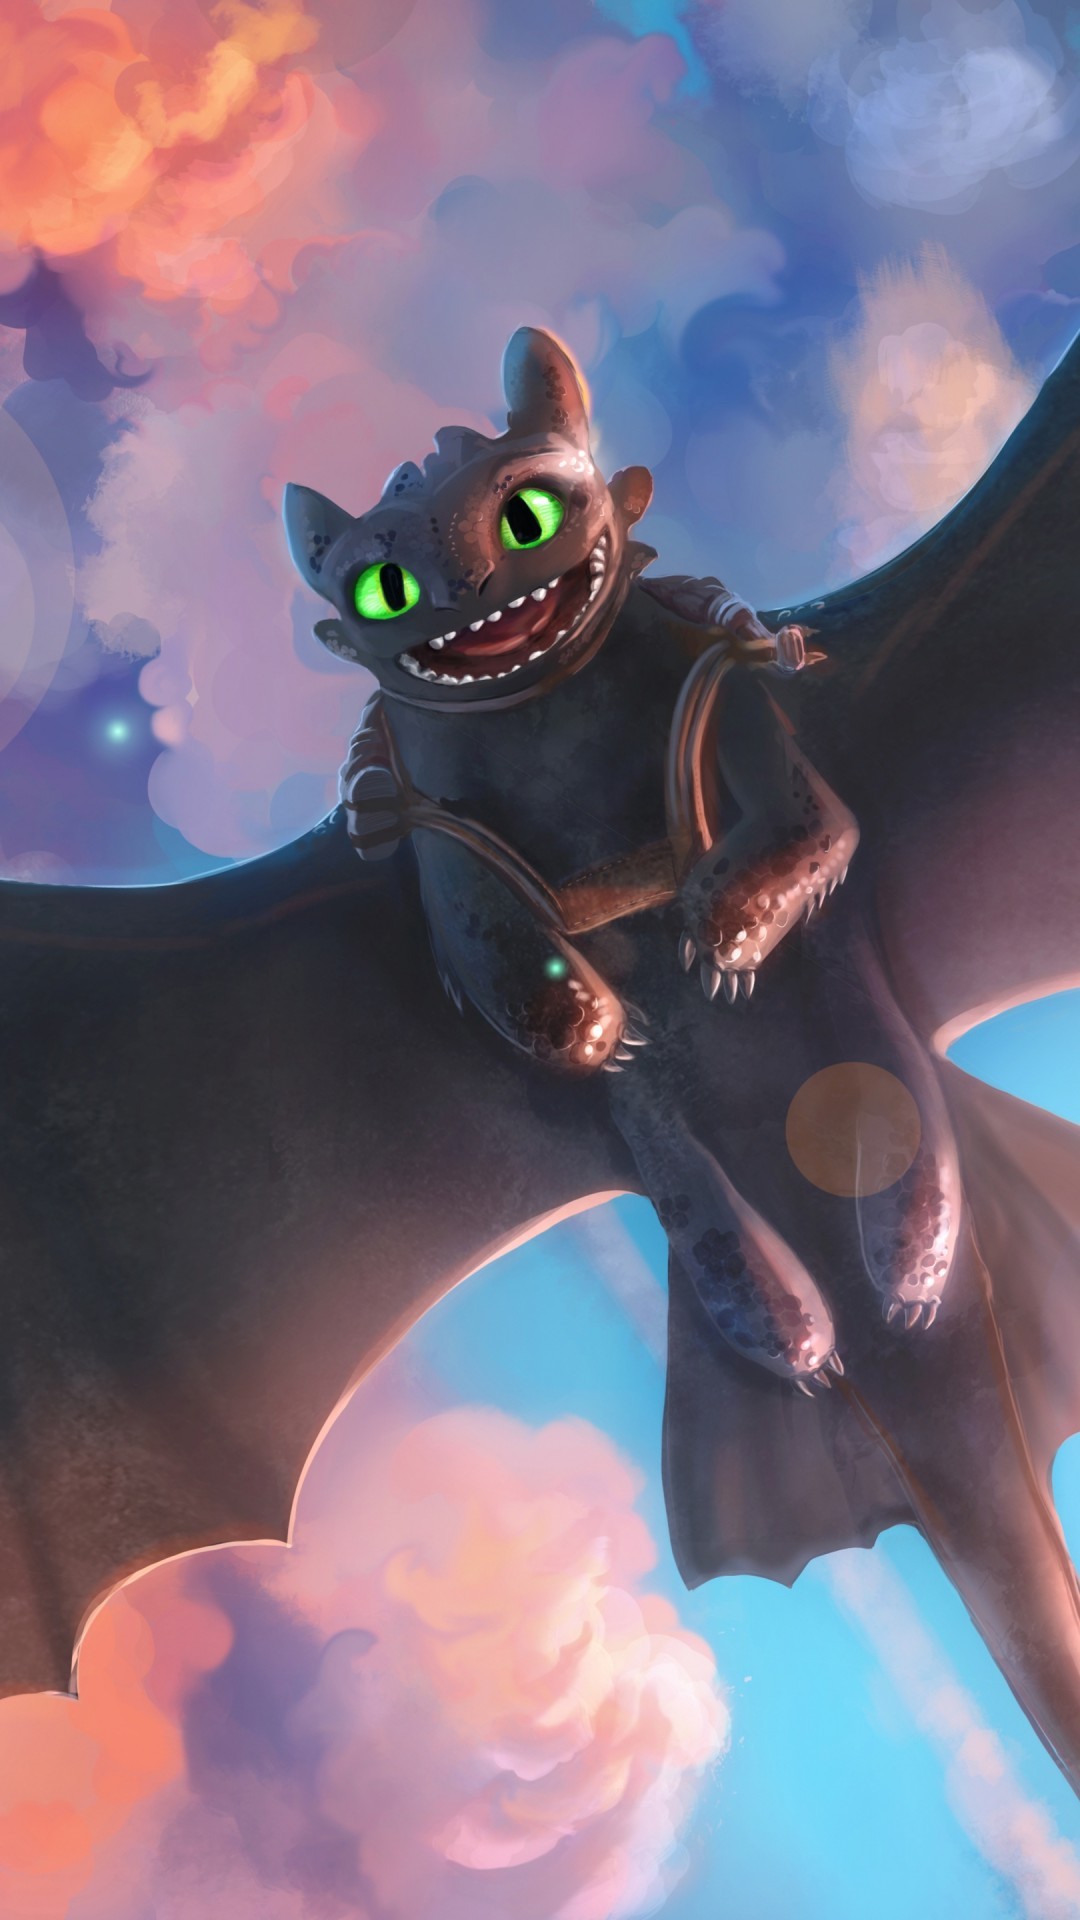 How To Train Your Dragon, Night Fury, Artwork - Alpha Night Fury Toothless - HD Wallpaper 